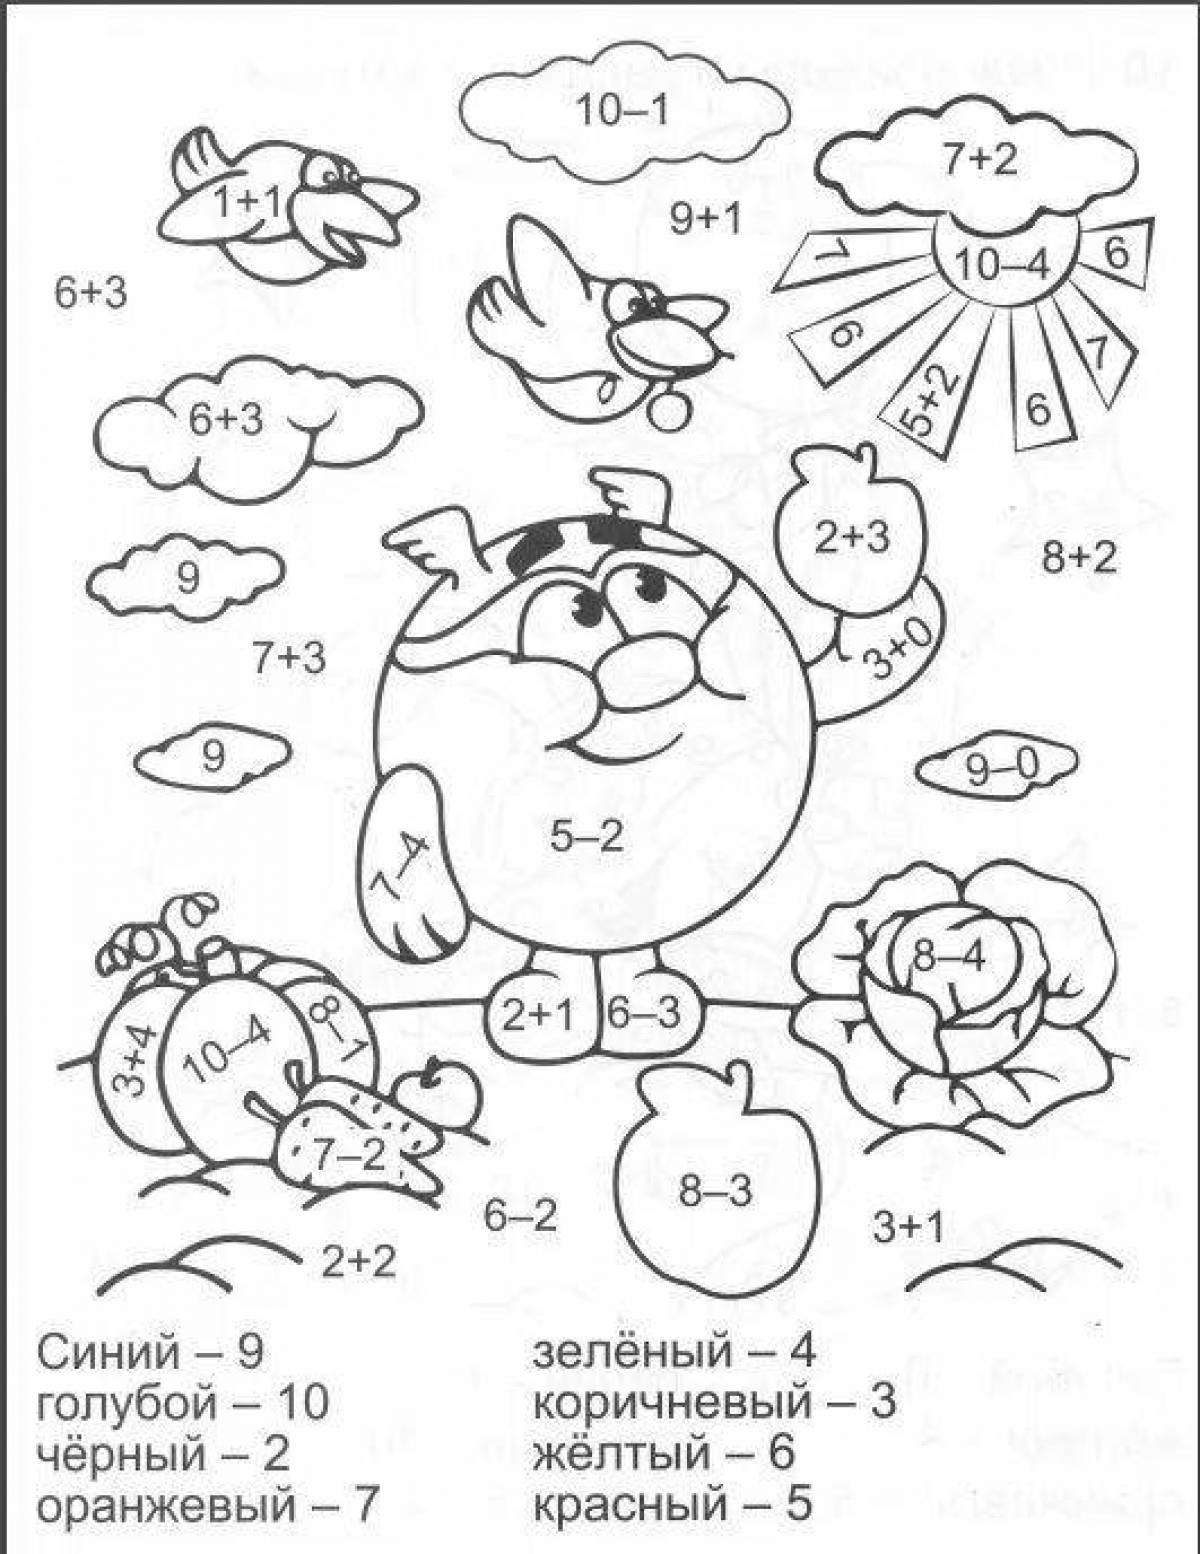 Intriguing coloring book math grade 1 score within 20